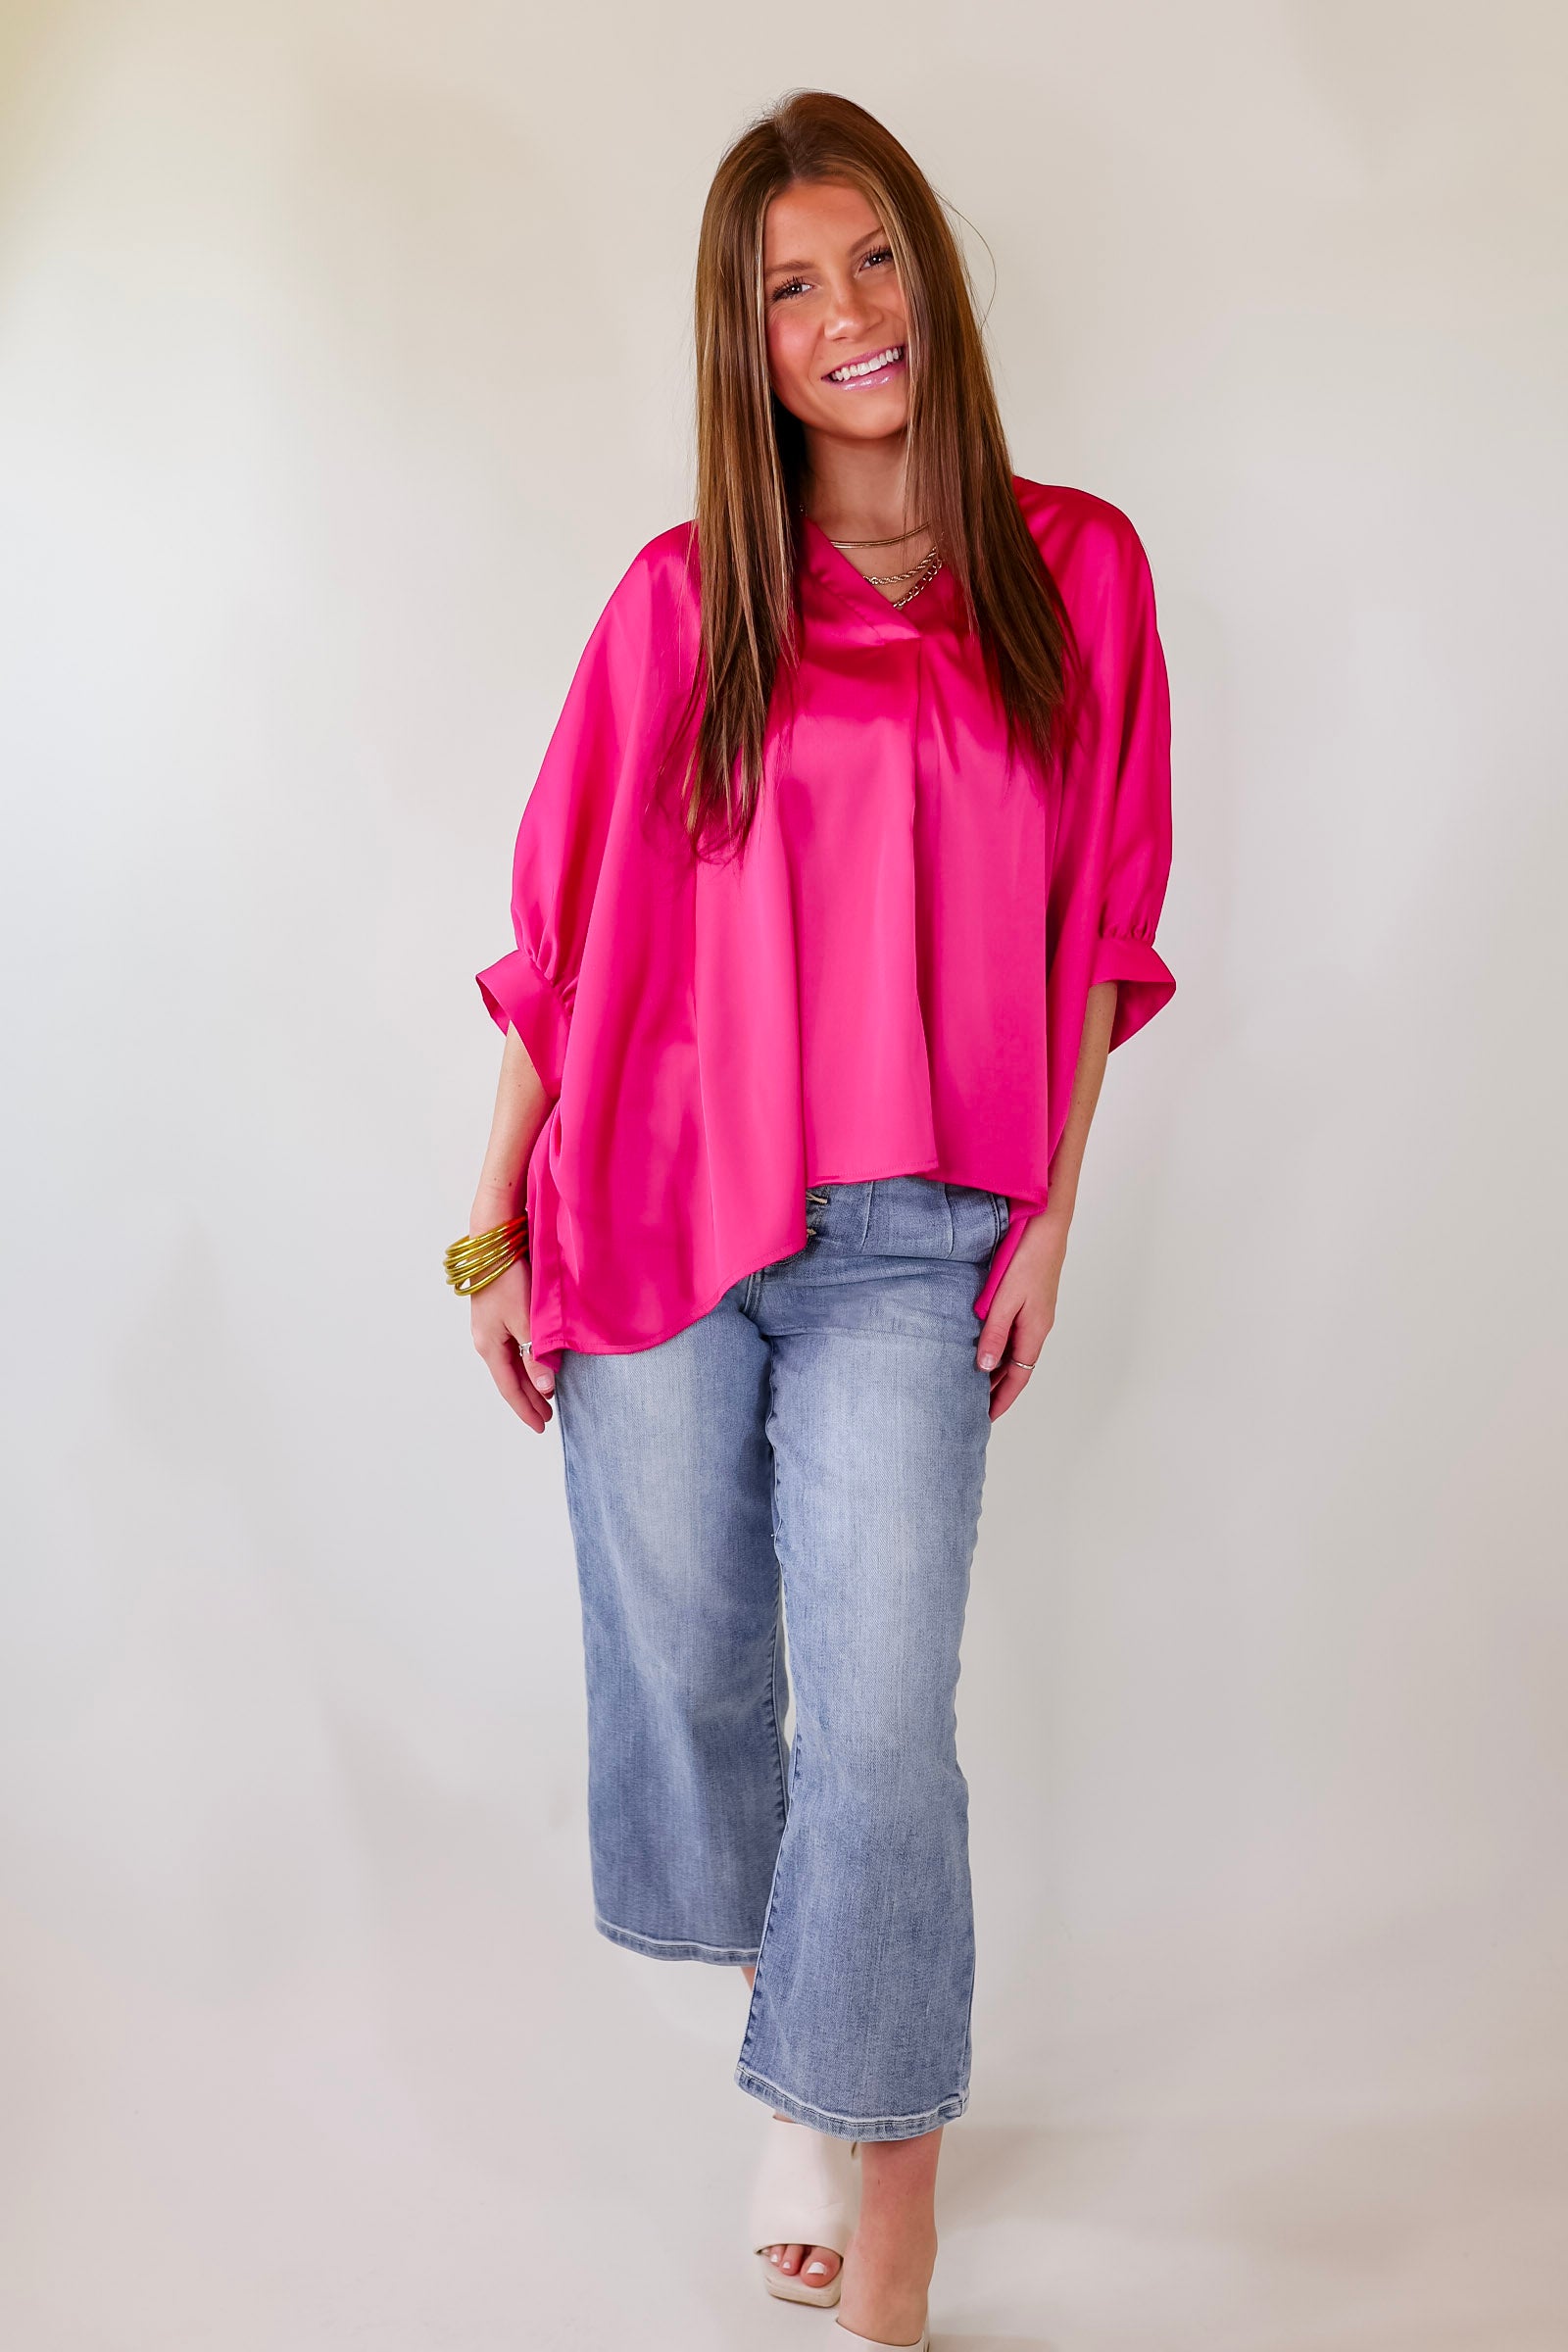 Irresistibly Chic Half Sleeve Oversized Blouse in Fuchsia Pink - Giddy Up Glamour Boutique